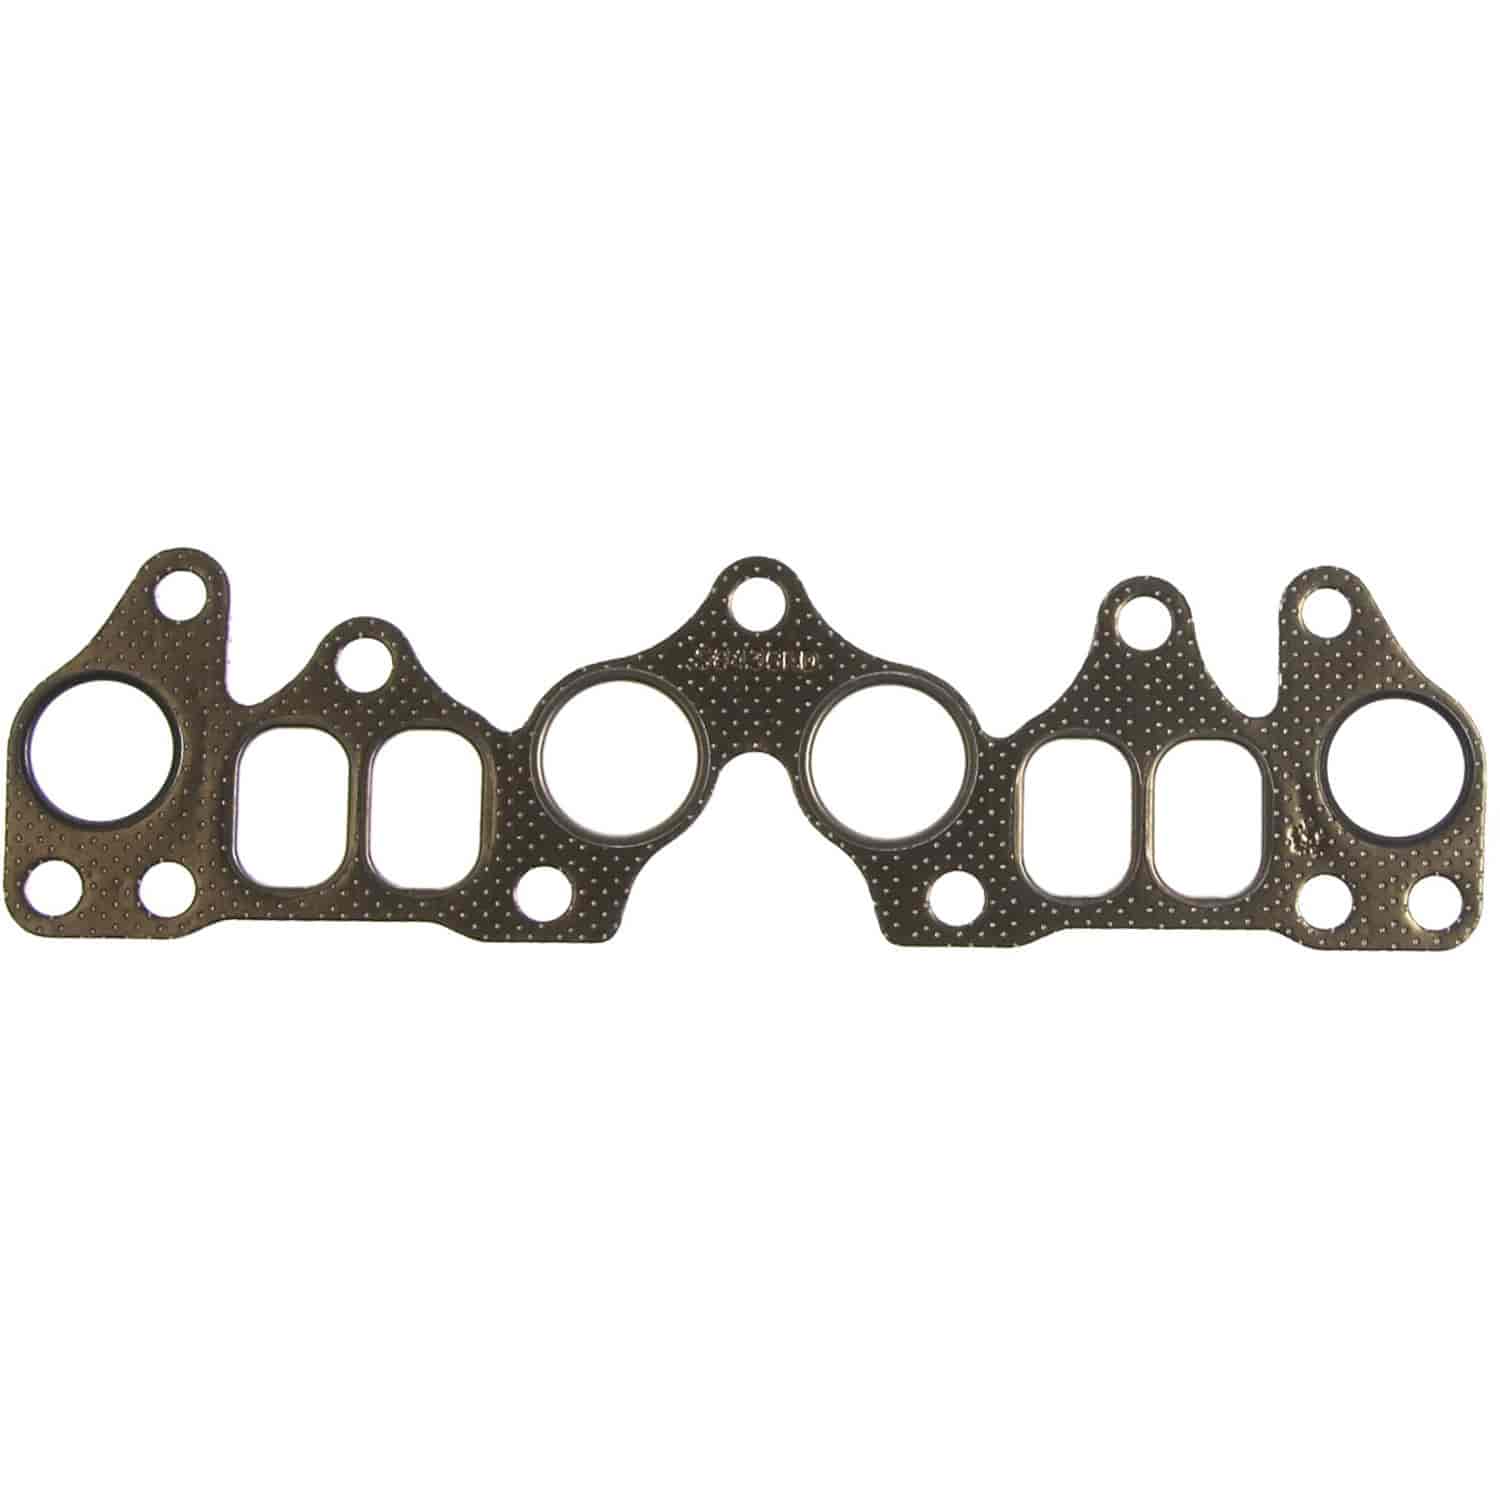 Intake And Exhaust Manifold Set Toyota Tercel w/1452cc